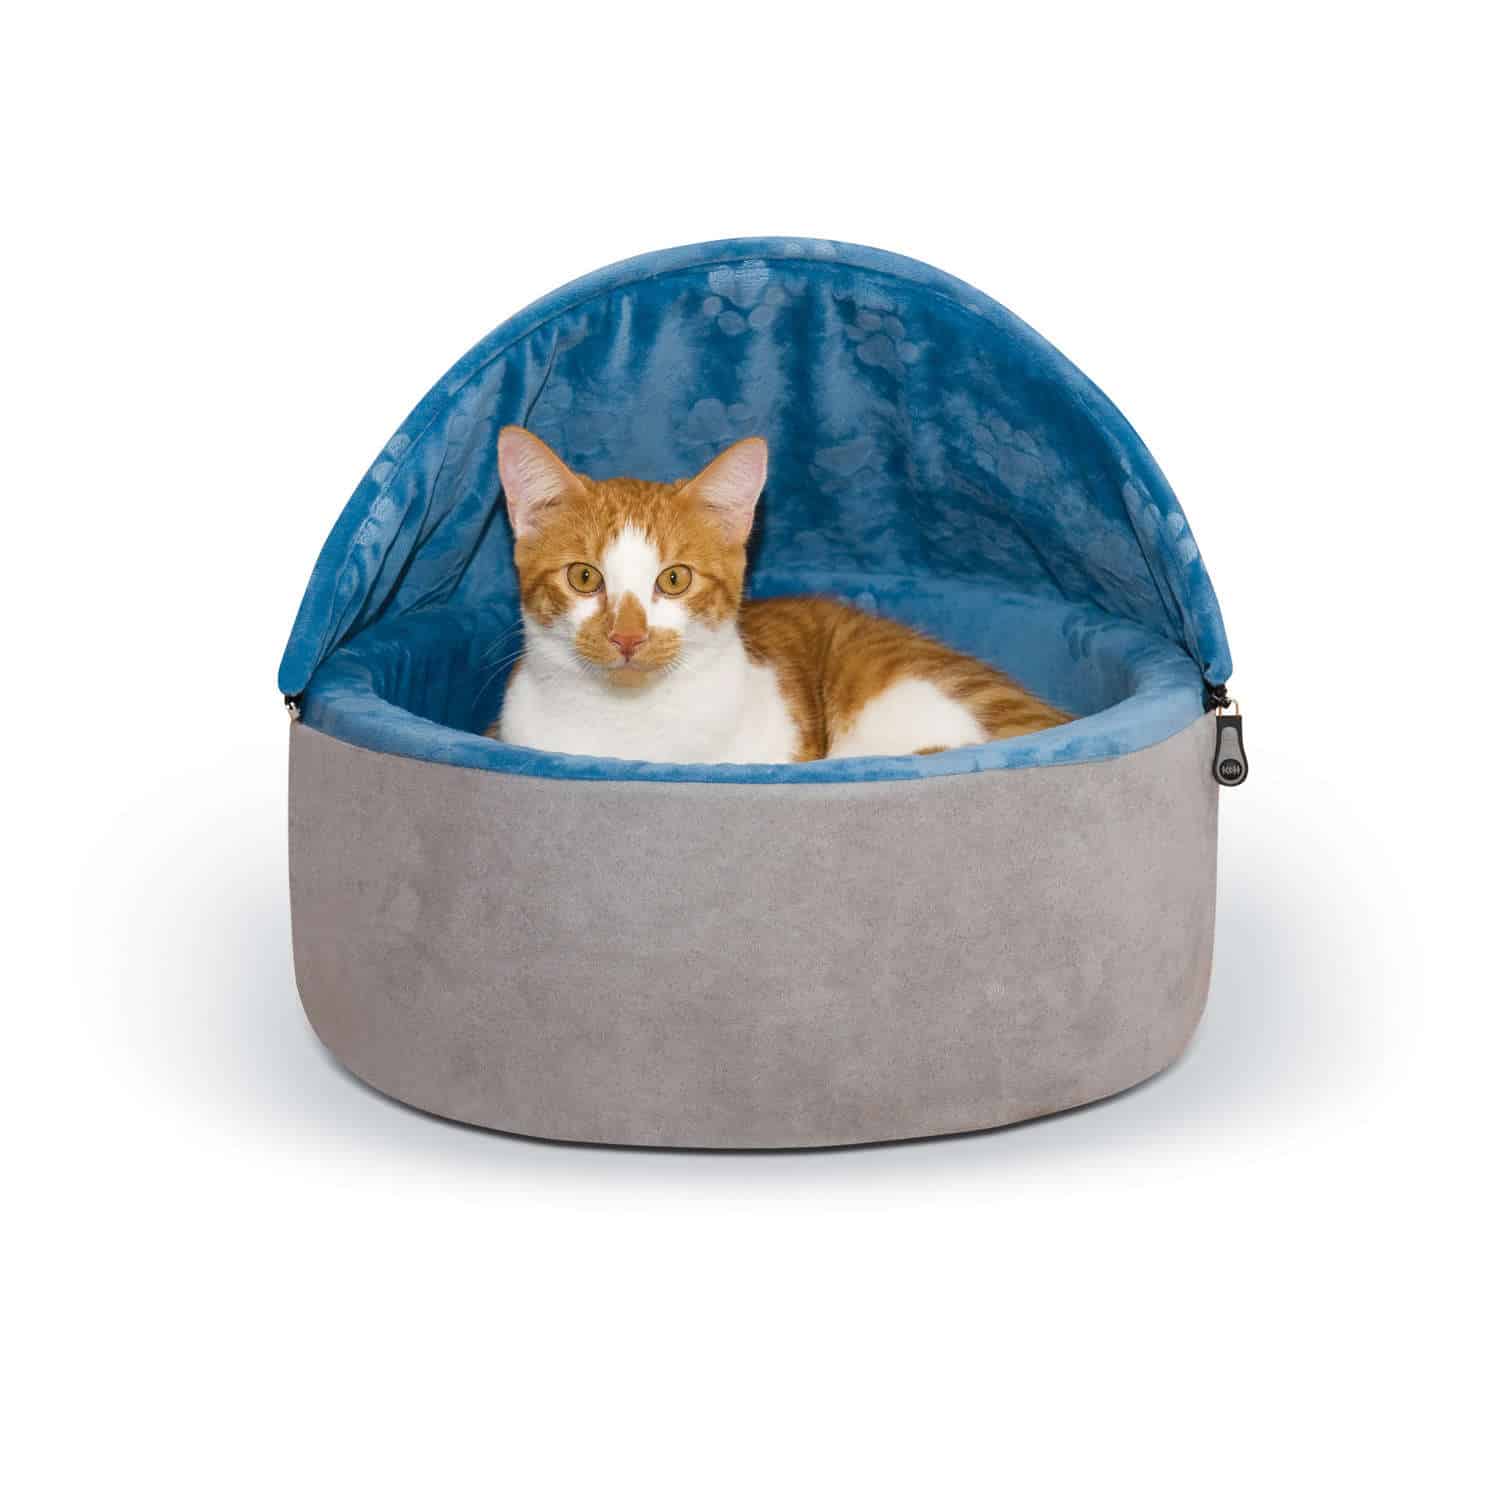 kh2996 Self-Warming Kitty Bed Hooded